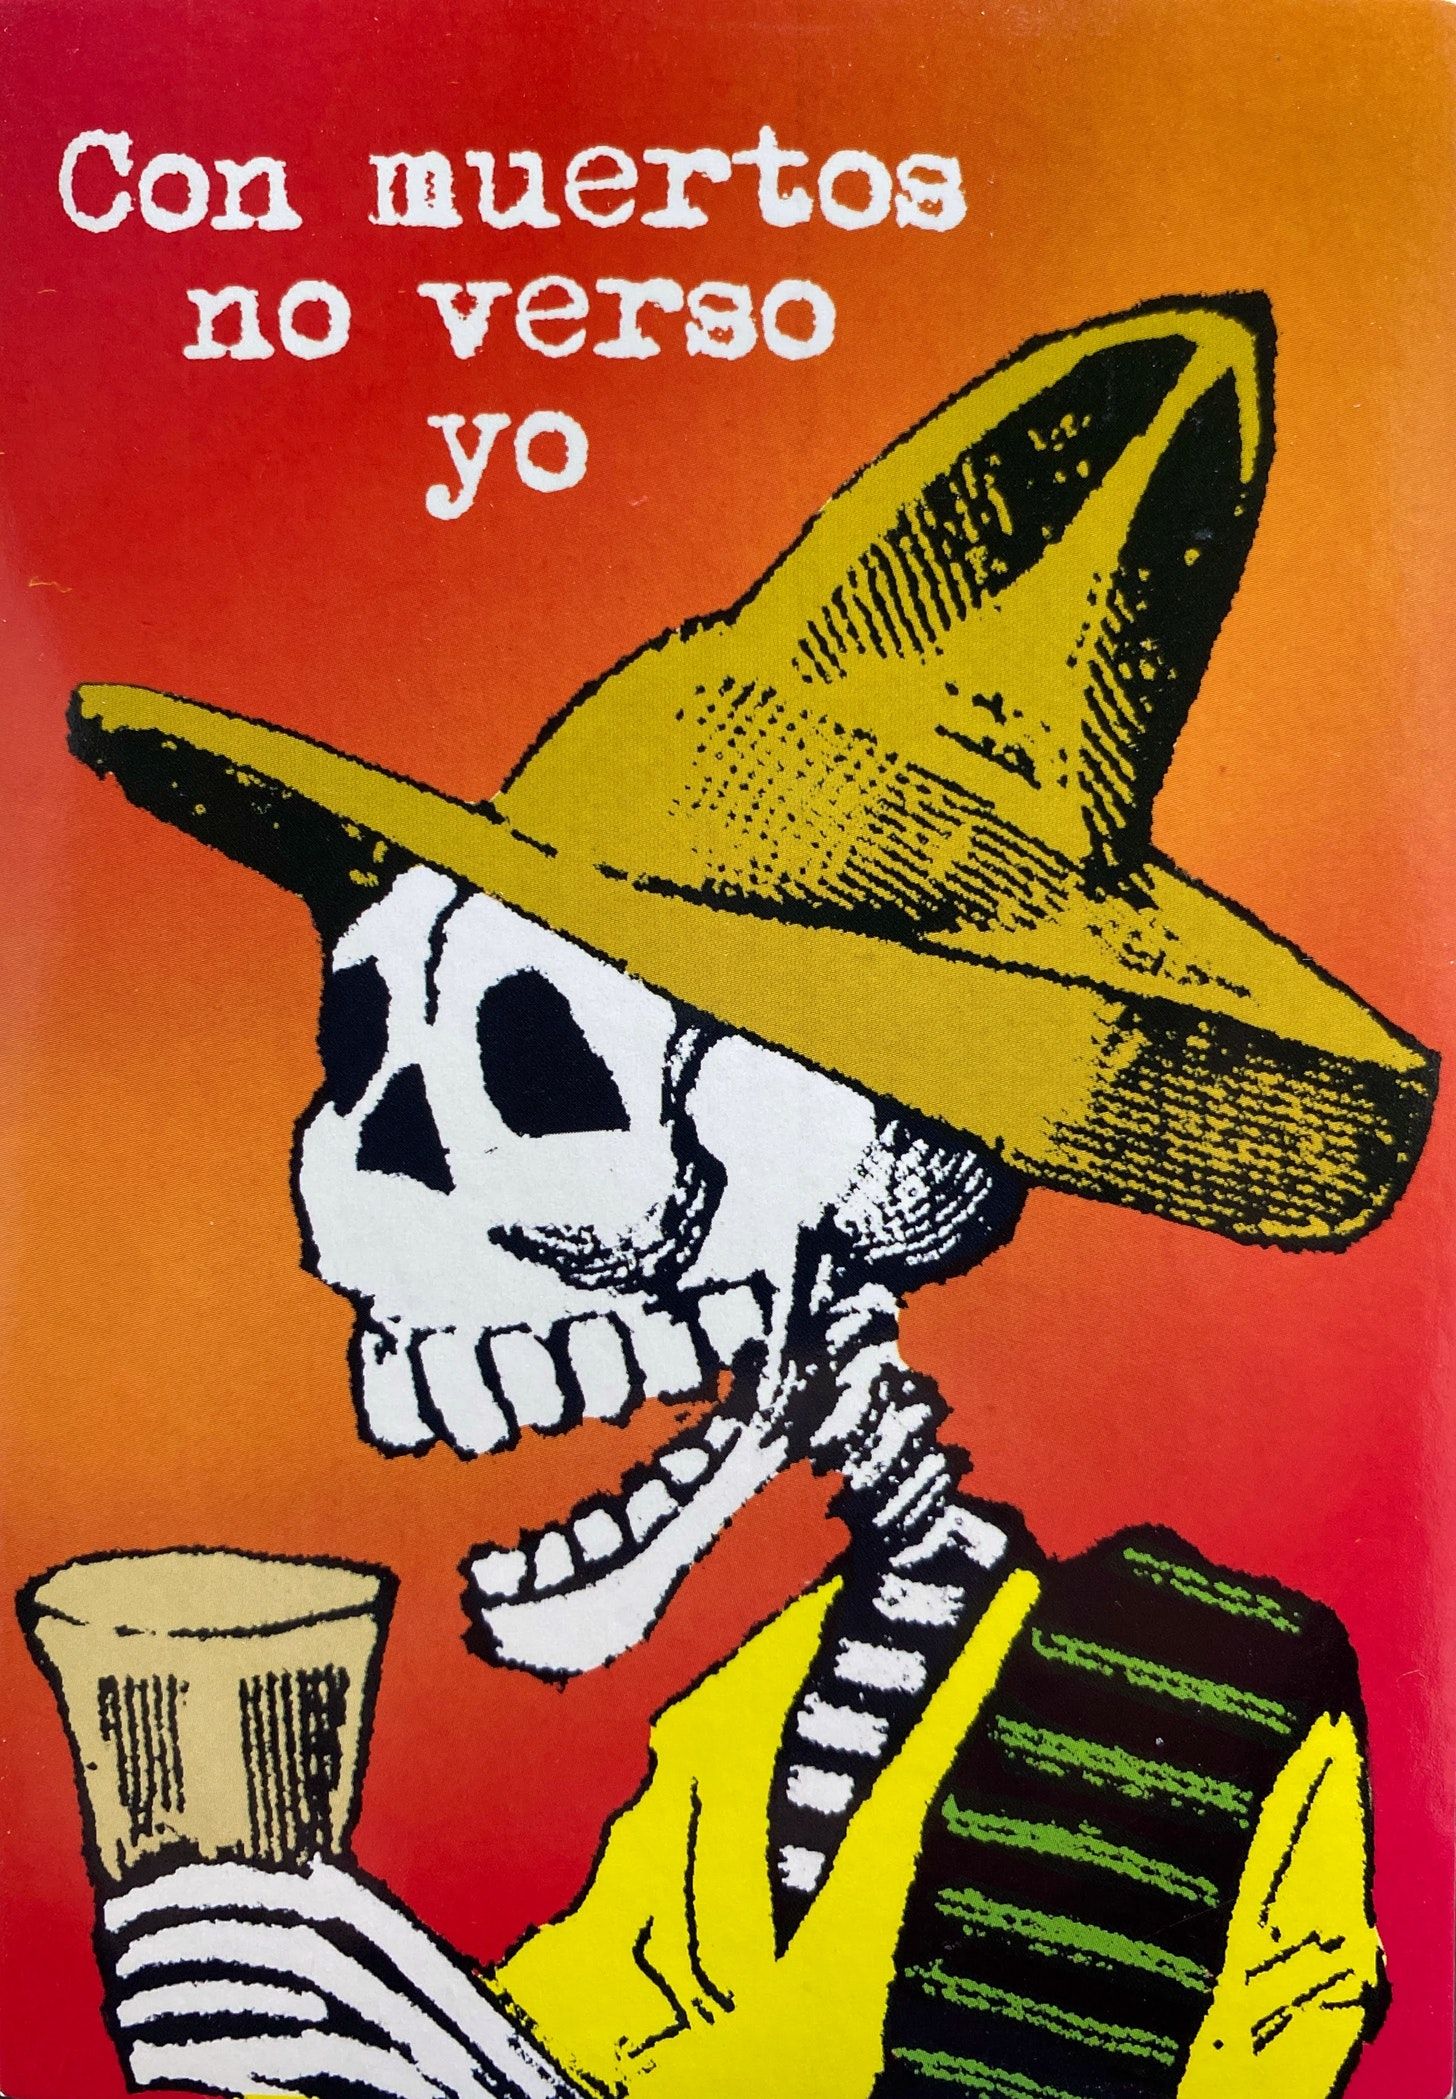 Portrait of a skeleton in profile, with a sombrero, a yellow shirt, and a sarape over their left shoulder. They are holding a large glass in their left hand.